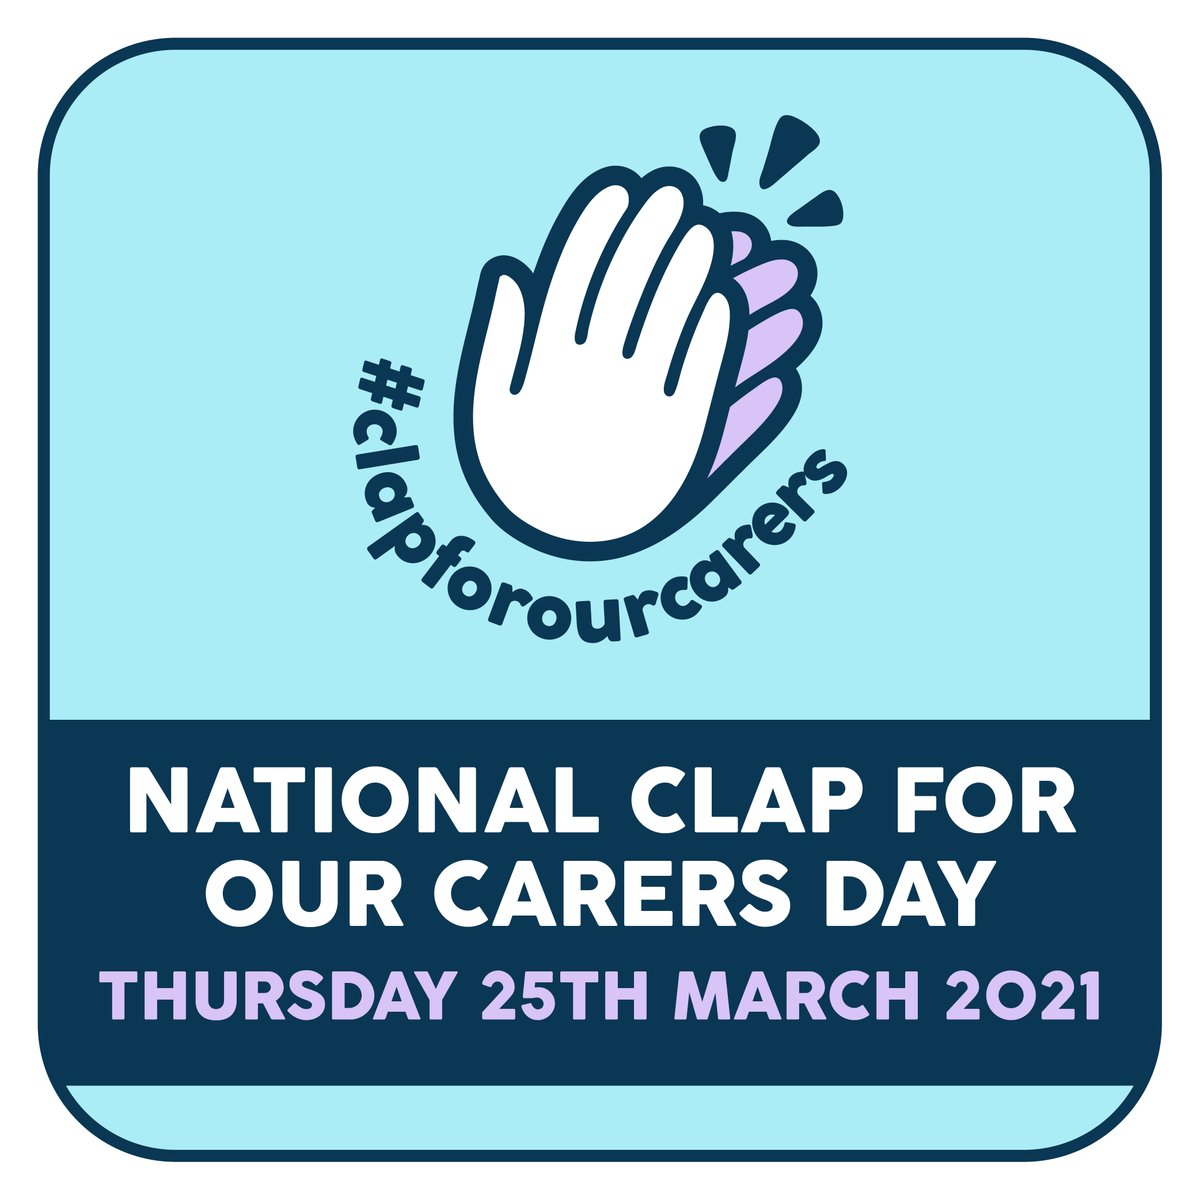 Join the nation on more time, Tonight at 8pm! Let's make it worthwhile 👏 #clapforourcarers #clapforkeyworkers #thankyouthursday #clapforcarers